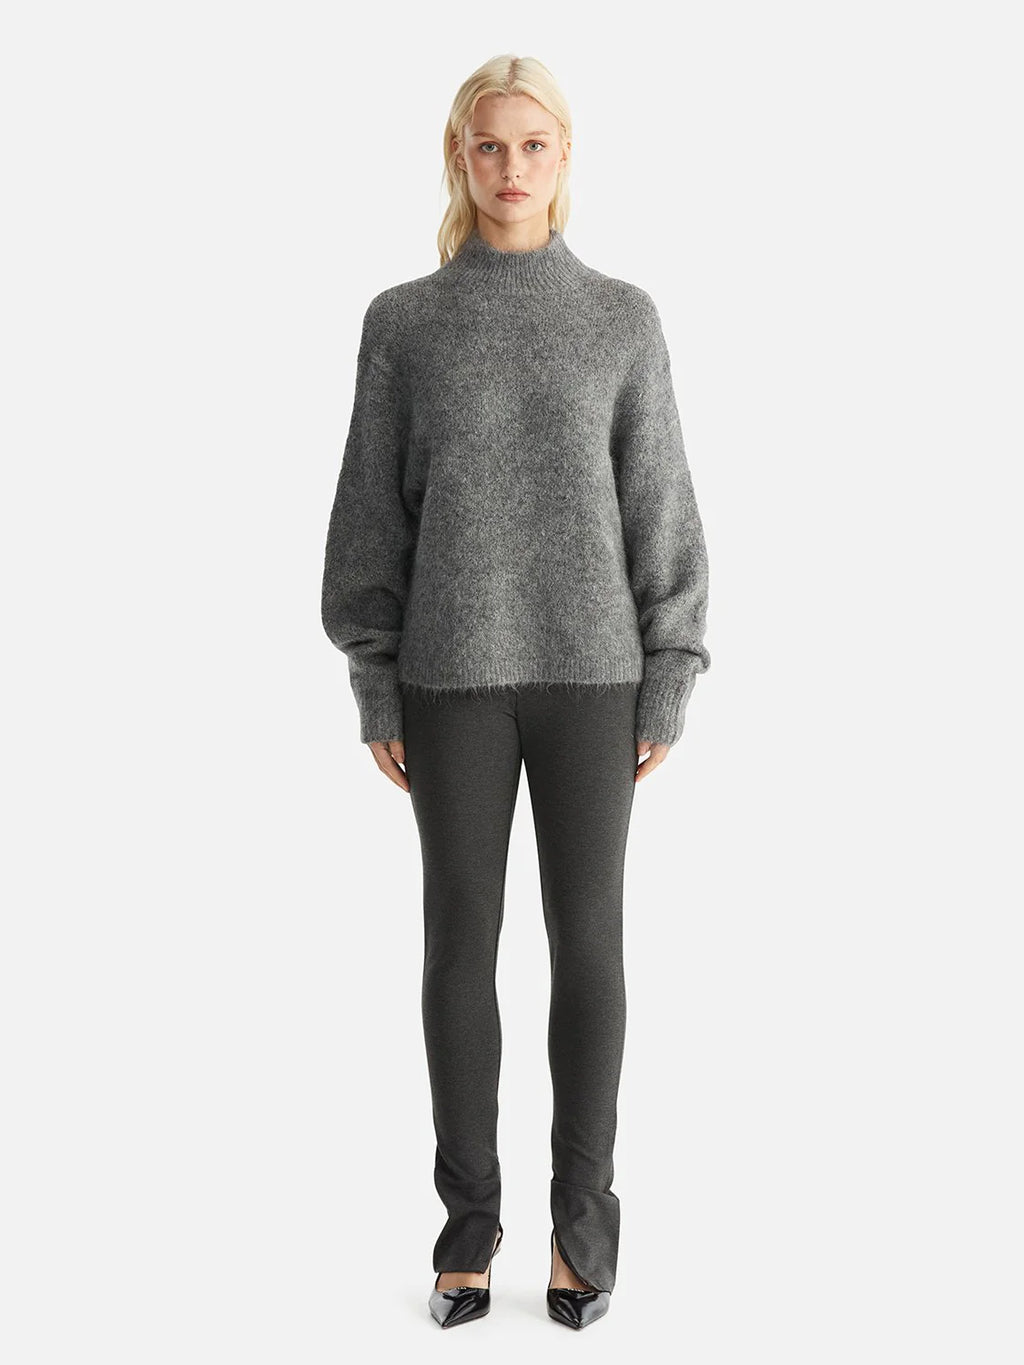 ENA PELLY - Nicola Mohair Knit - Charcoal